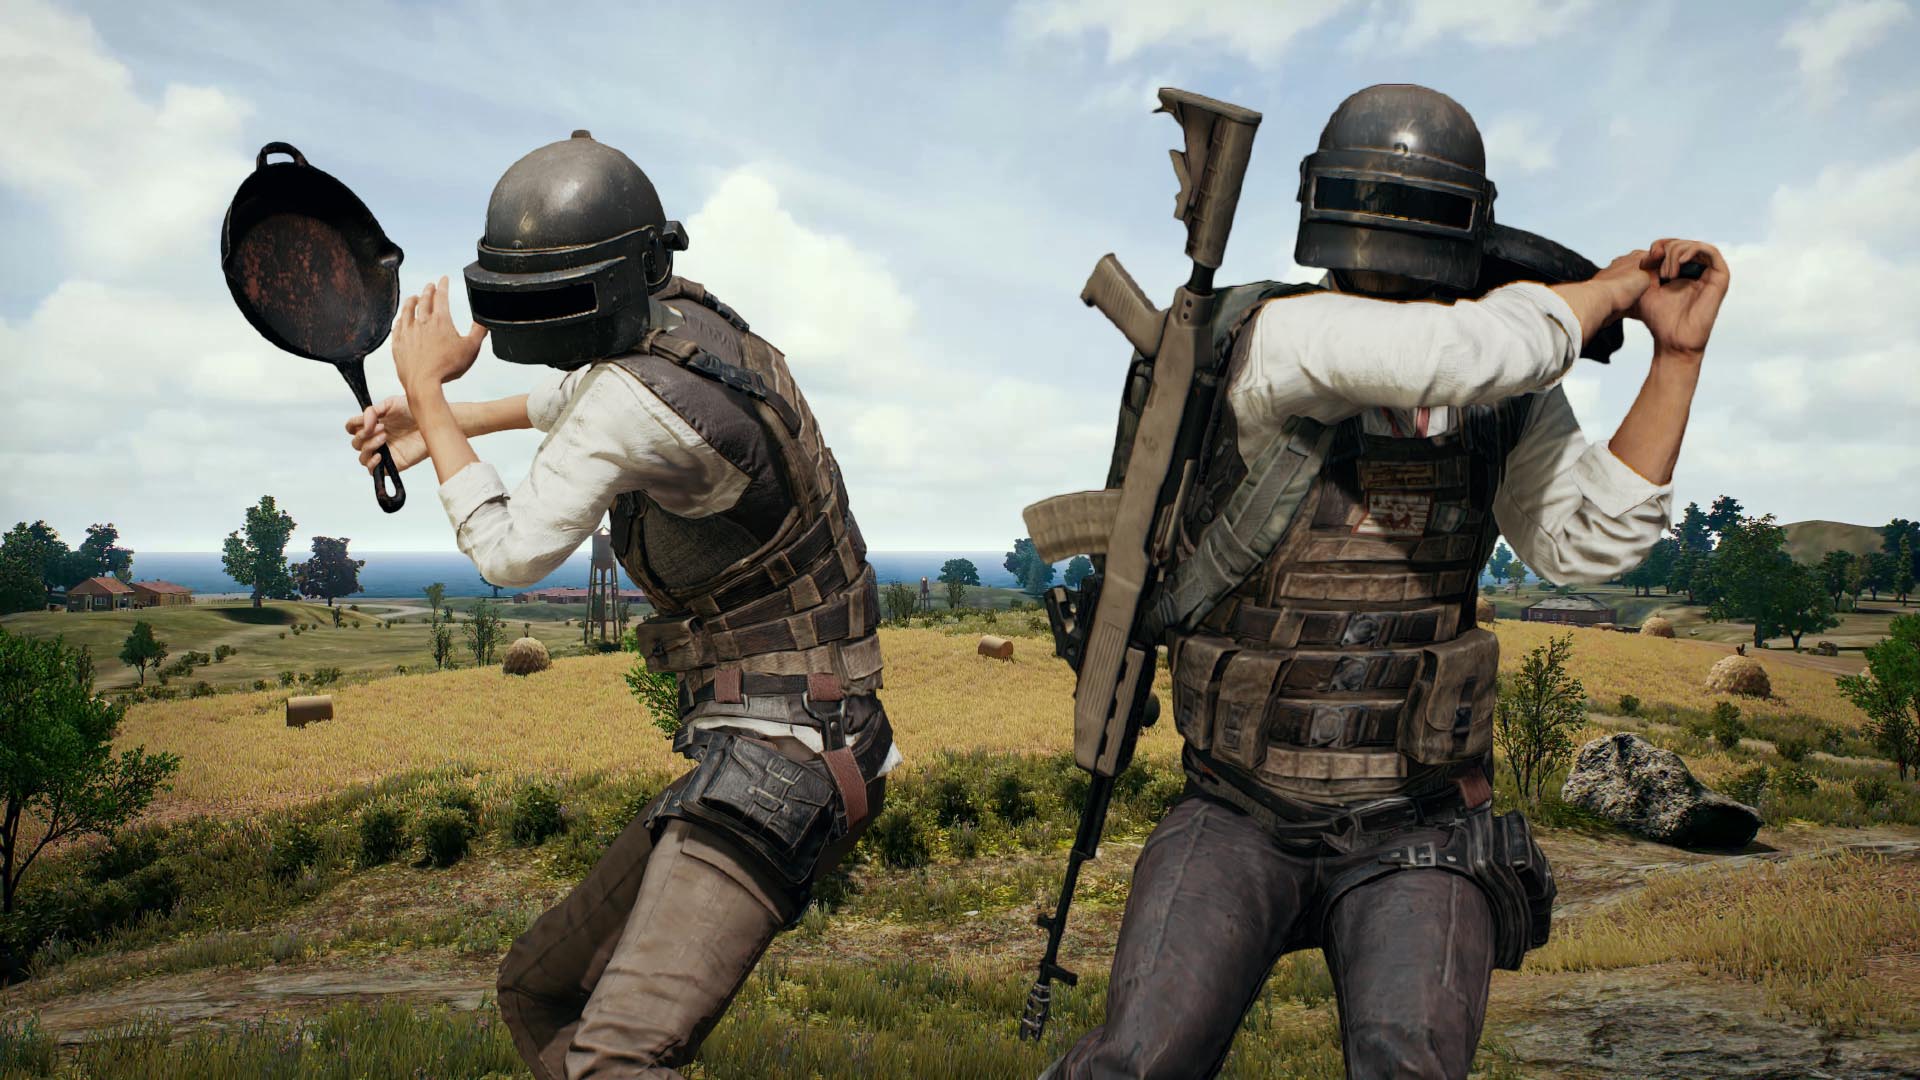 PUBG vs. Free Fire: Which Game Is Better to Play and Why?